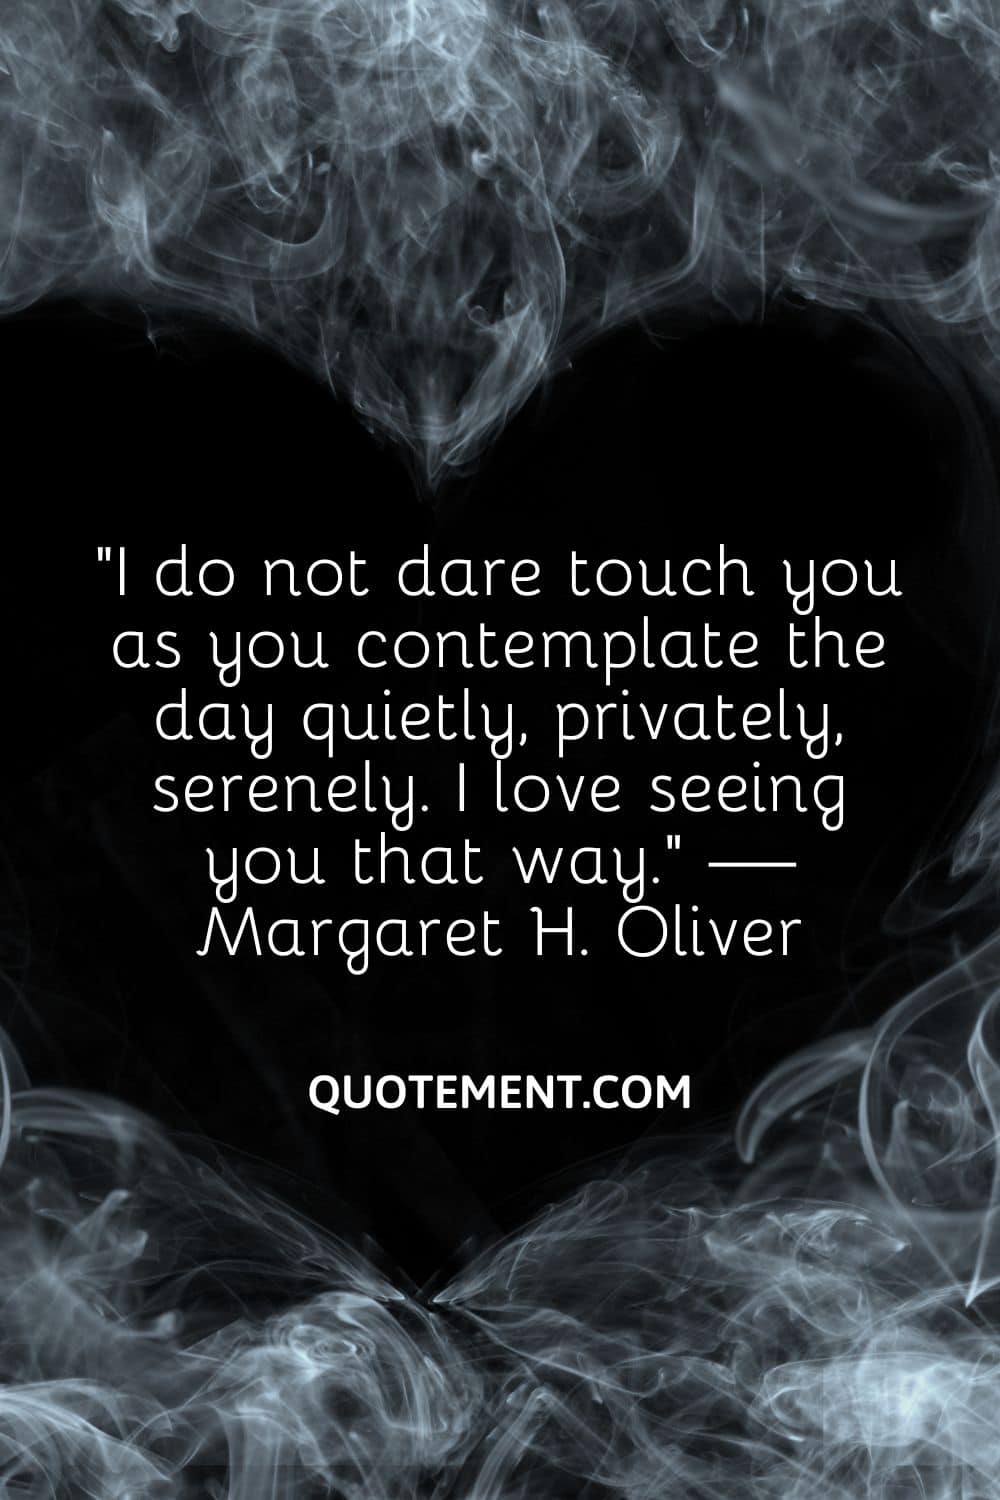 I do not dare touch you as you contemplate the day quietly, privately, serenely